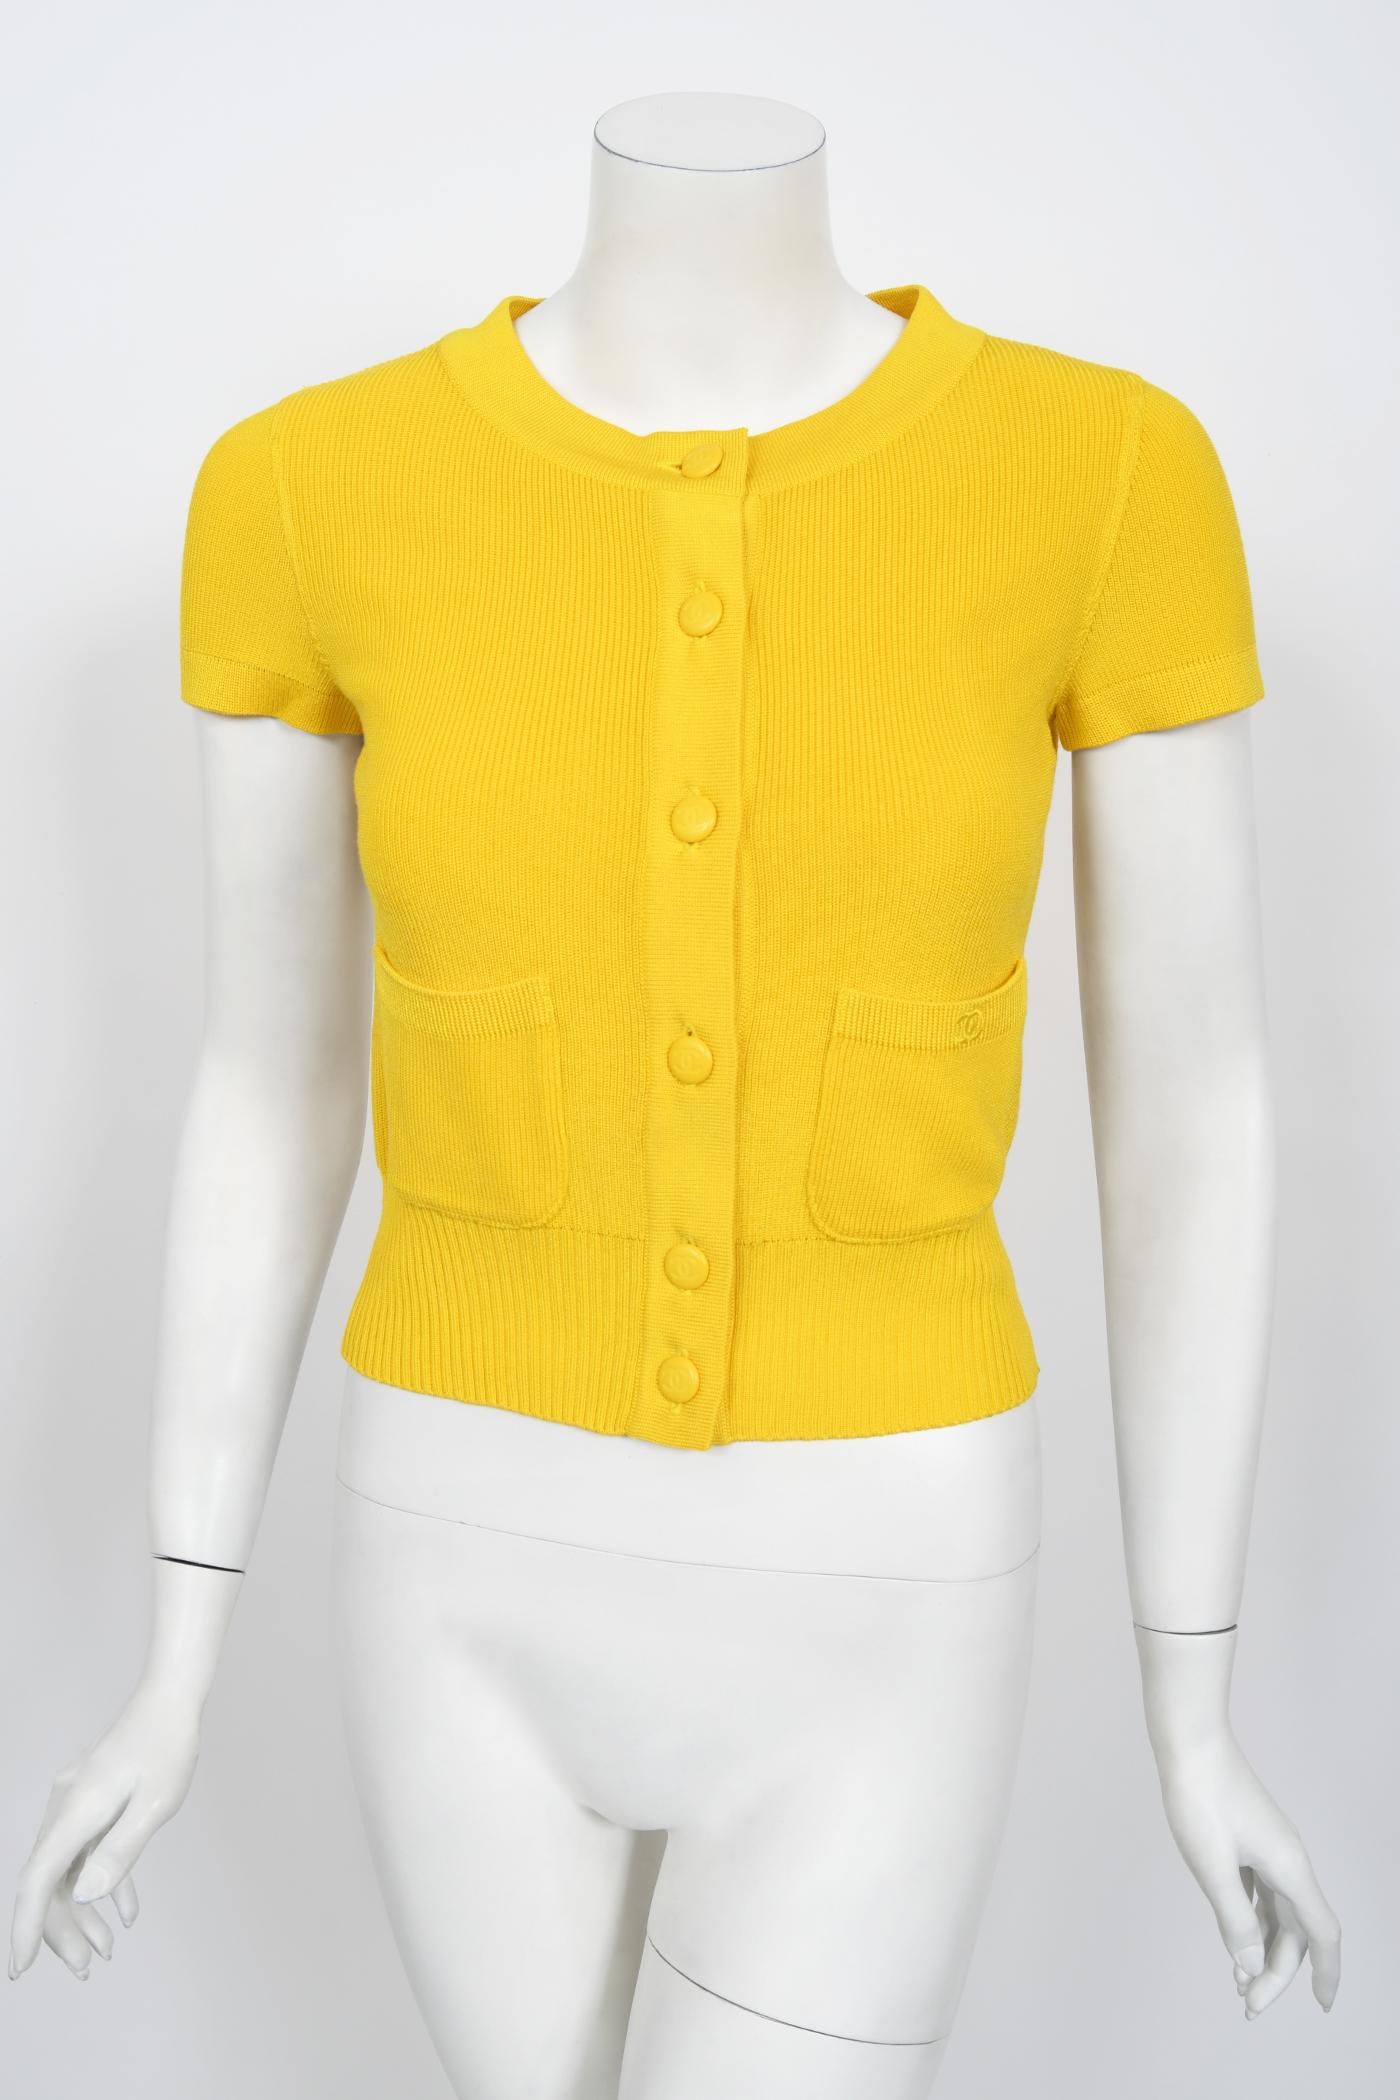 Vintage 1996 Chanel by Karl Lagerfeld Runway Yellow Knit Cropped Sweater Set  10